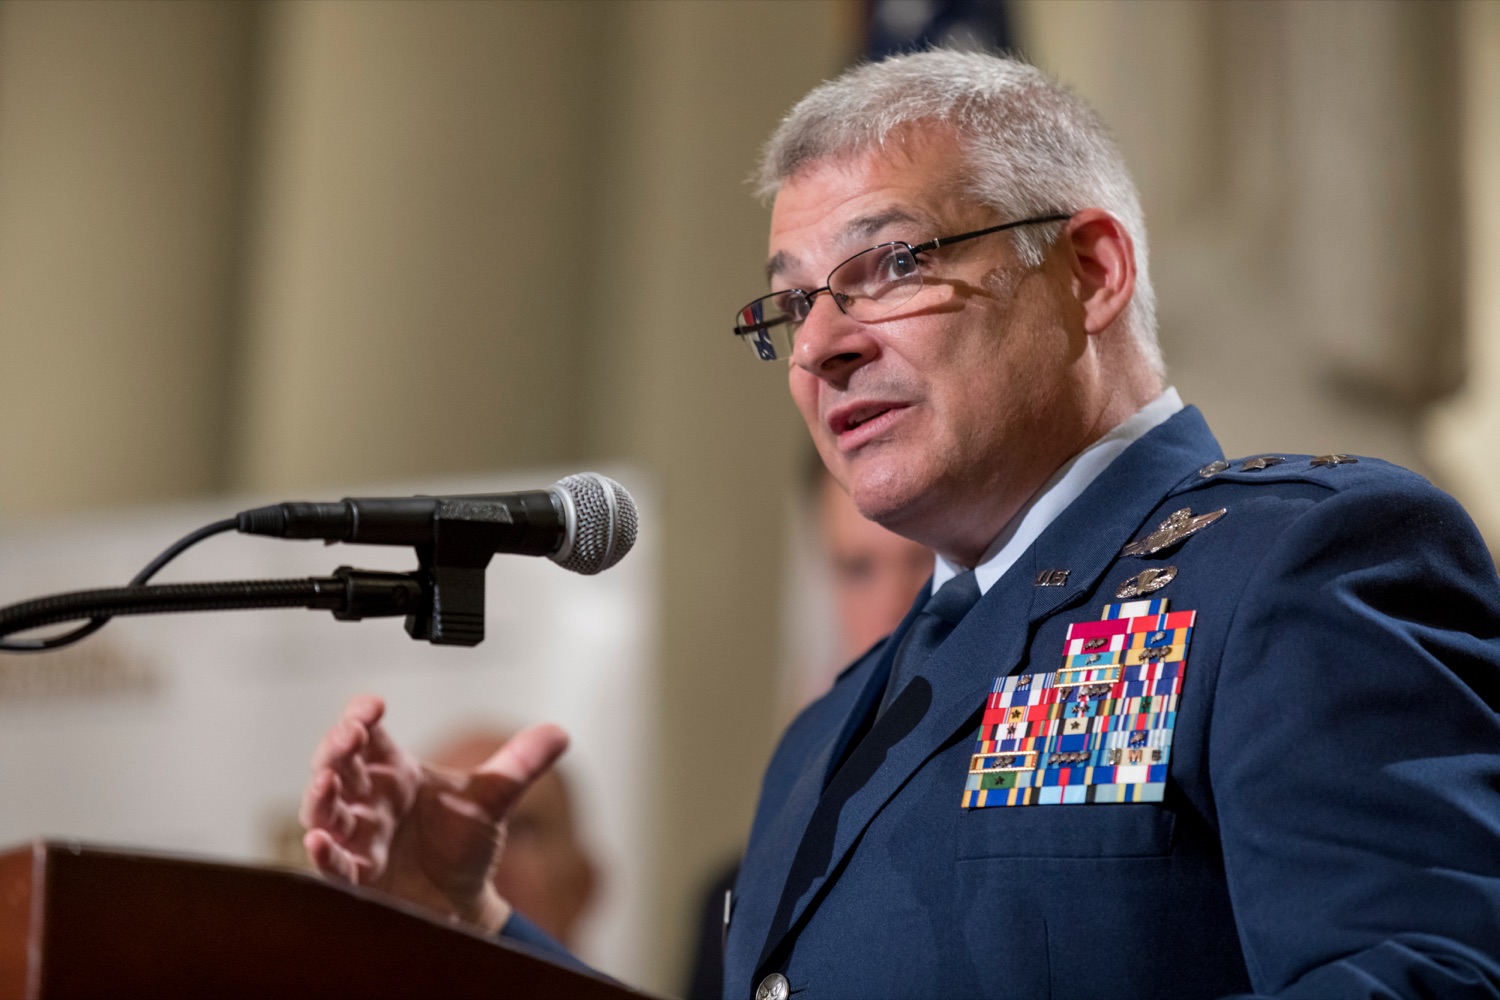 Maj. Gen. Anthony Carrelli, USAF and adjutant general of Pennsylvania, speaks during a press conference outlining how competition for qualified individuals among all employment sectors affects military recruiting efforts and warrants greater investment in our next generation inside the Capitol Rotunda on Tuesday, November 12, 2019.<br><a href="https://filesource.amperwave.net/commonwealthofpa/photo/17588_GOV_Mission_Readiness_NK_004.JPG" target="_blank">⇣ Download Photo</a>